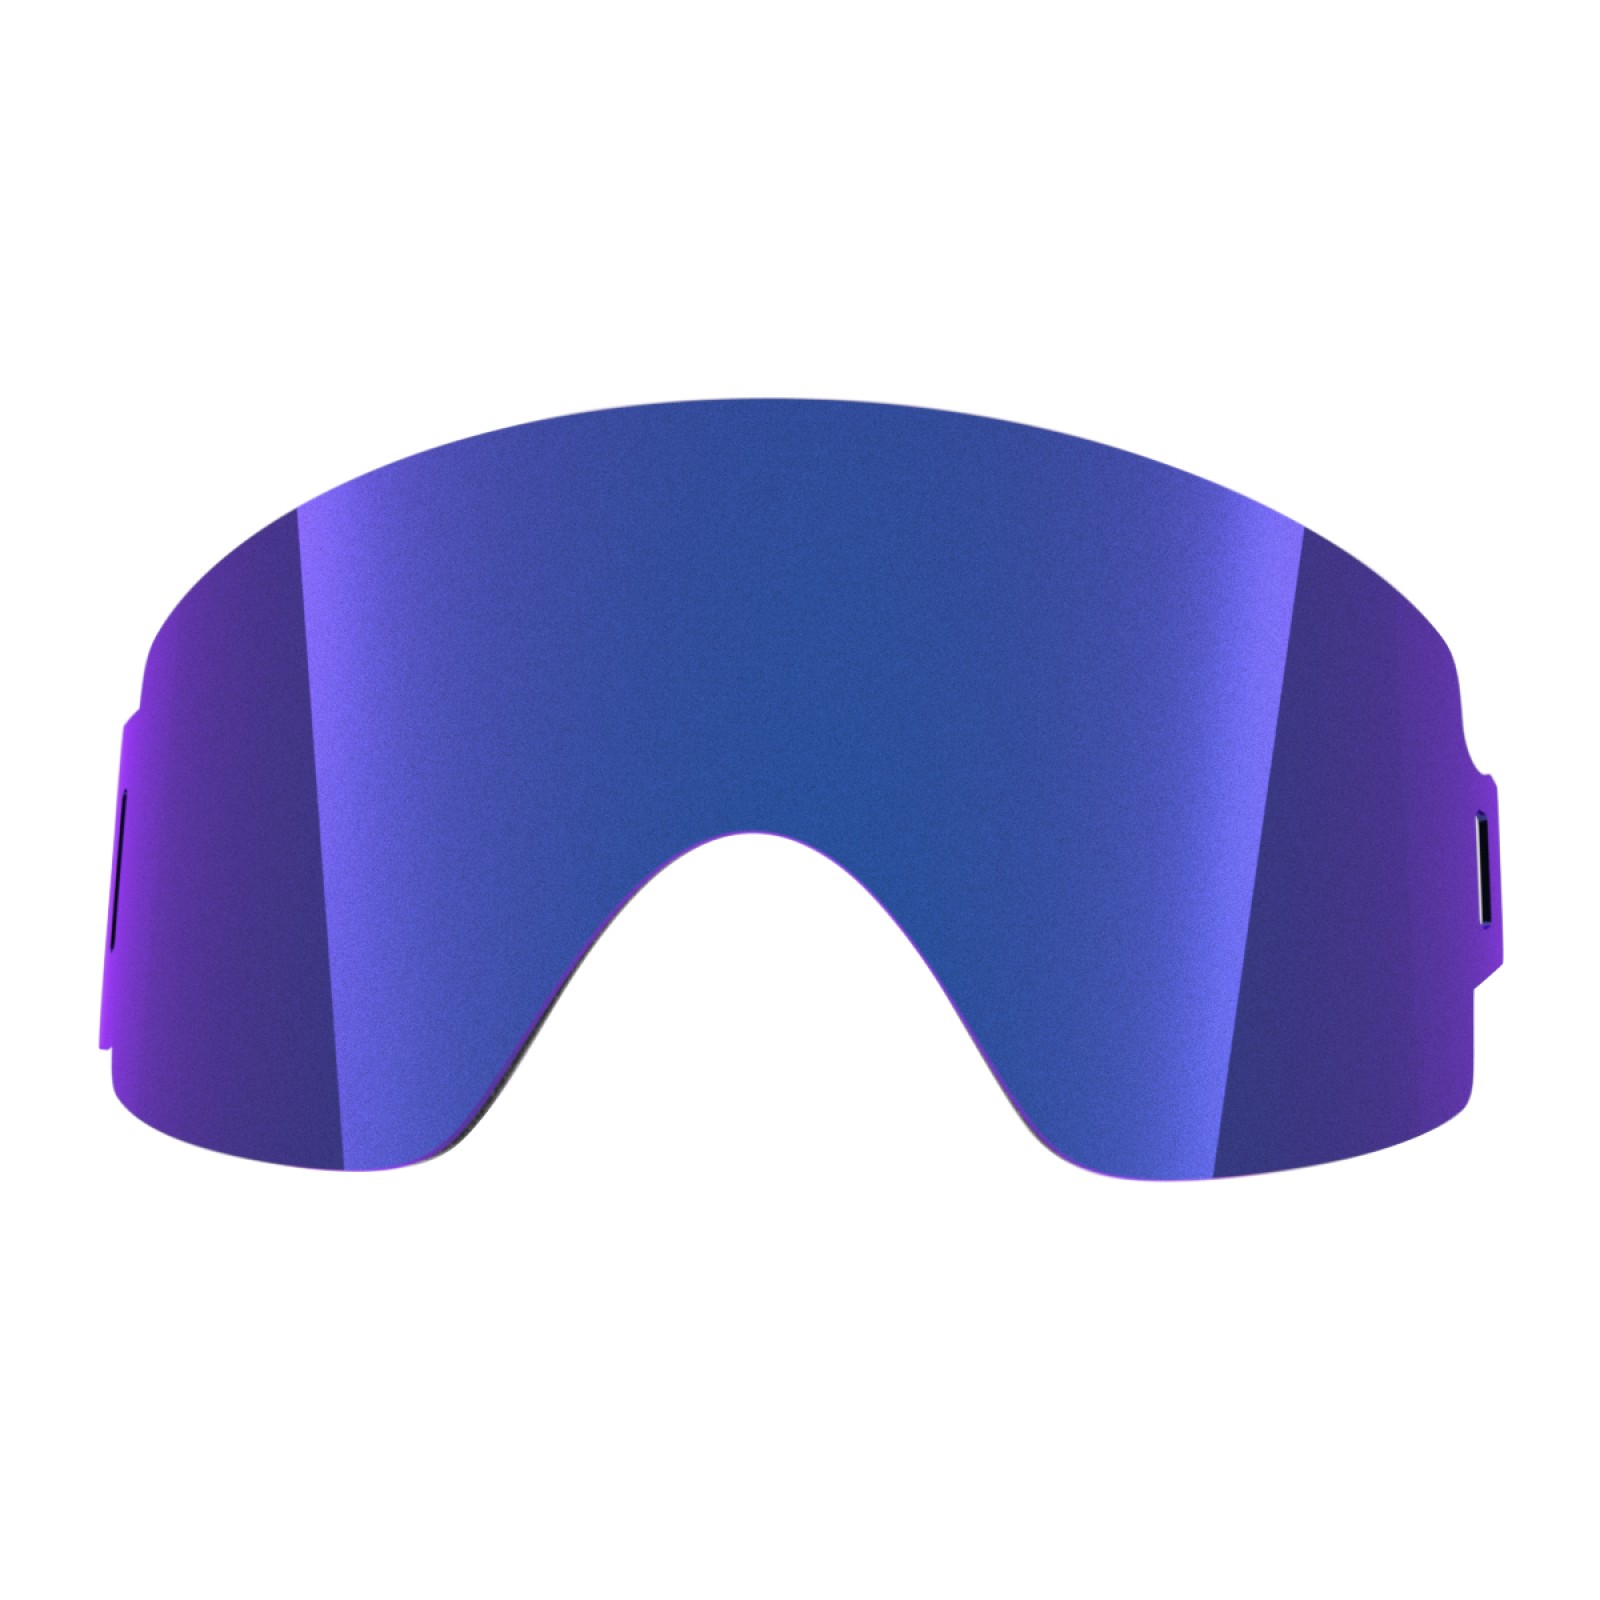 The One Gelo lens for Shift goggle